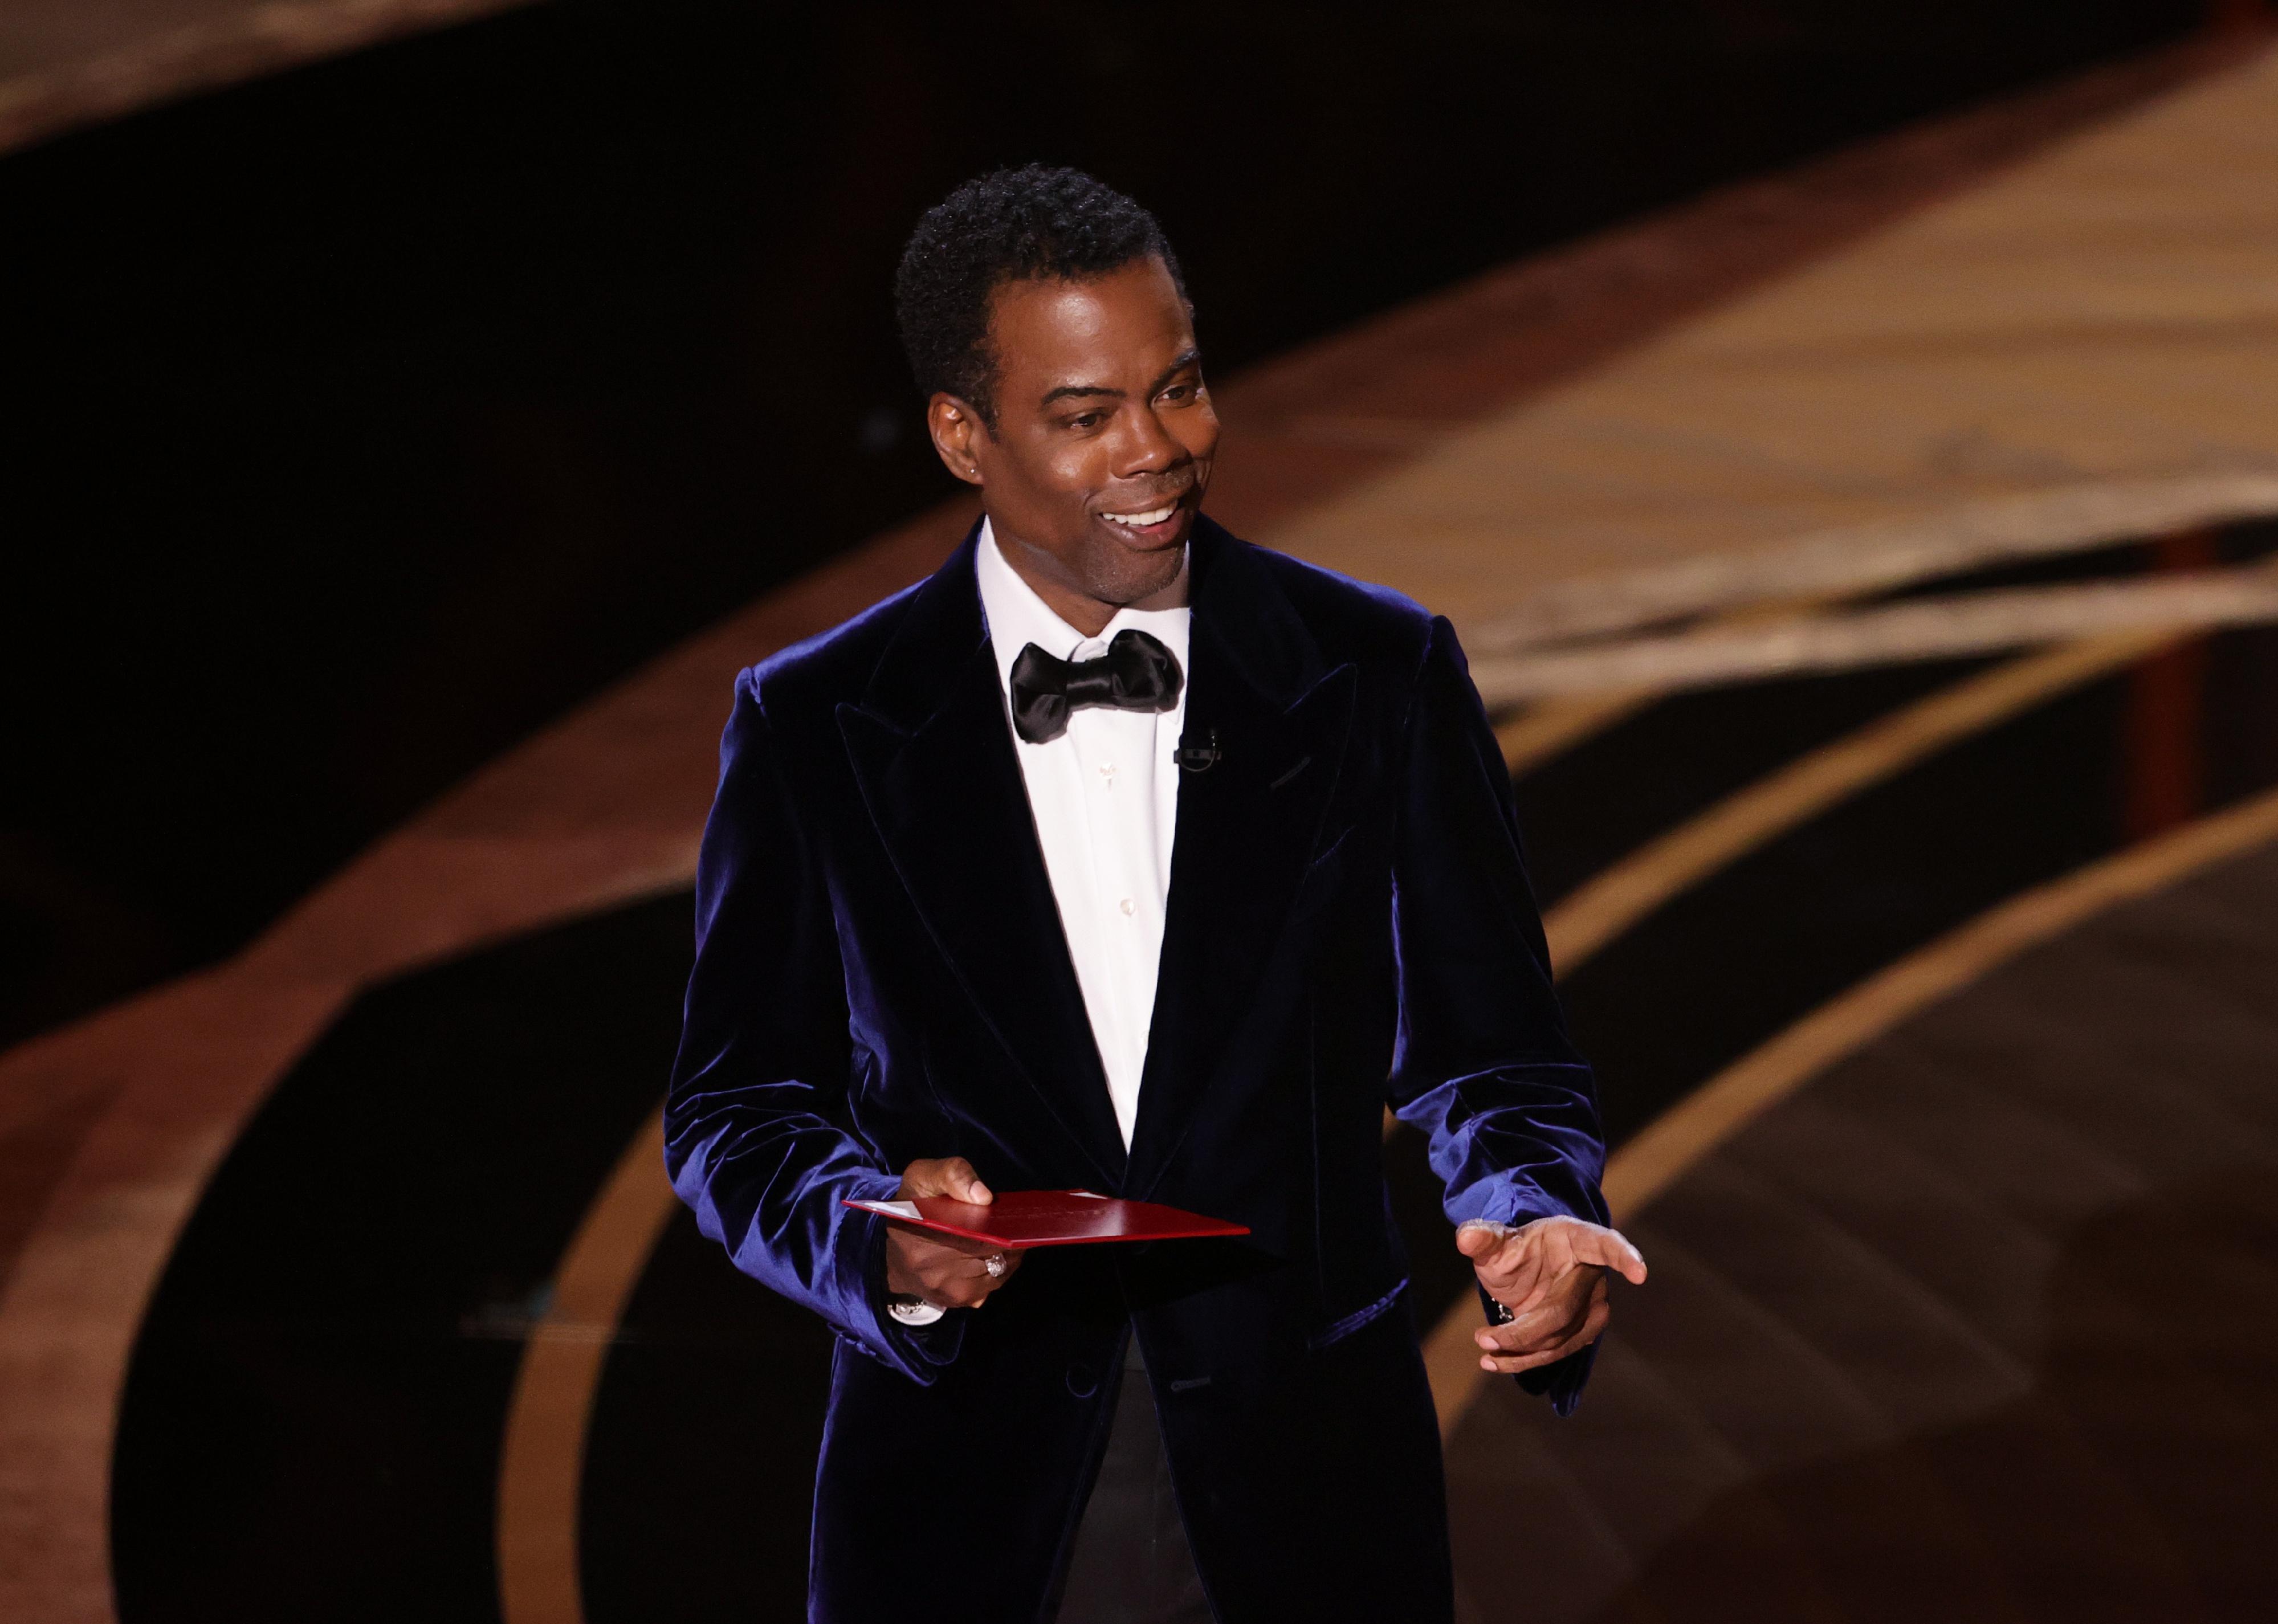 Chris Rock speaks onstage during the 94th Annual Academy Awards.